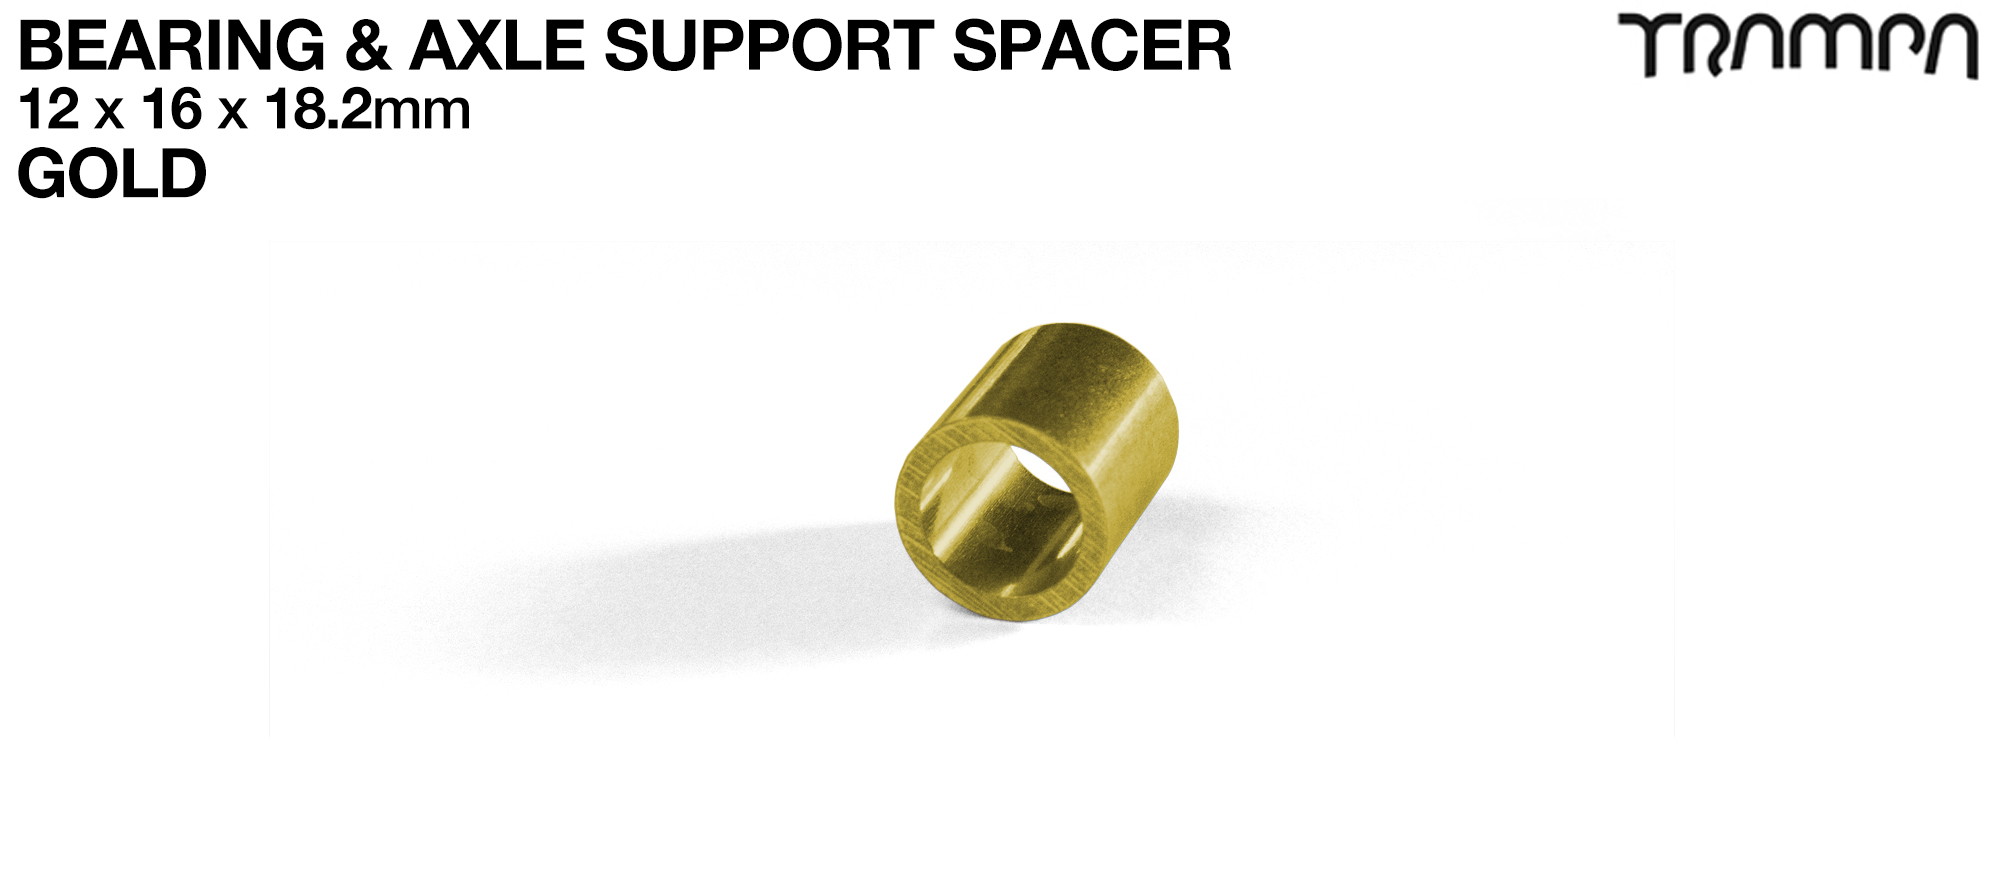 GOLD Axle Spacers 